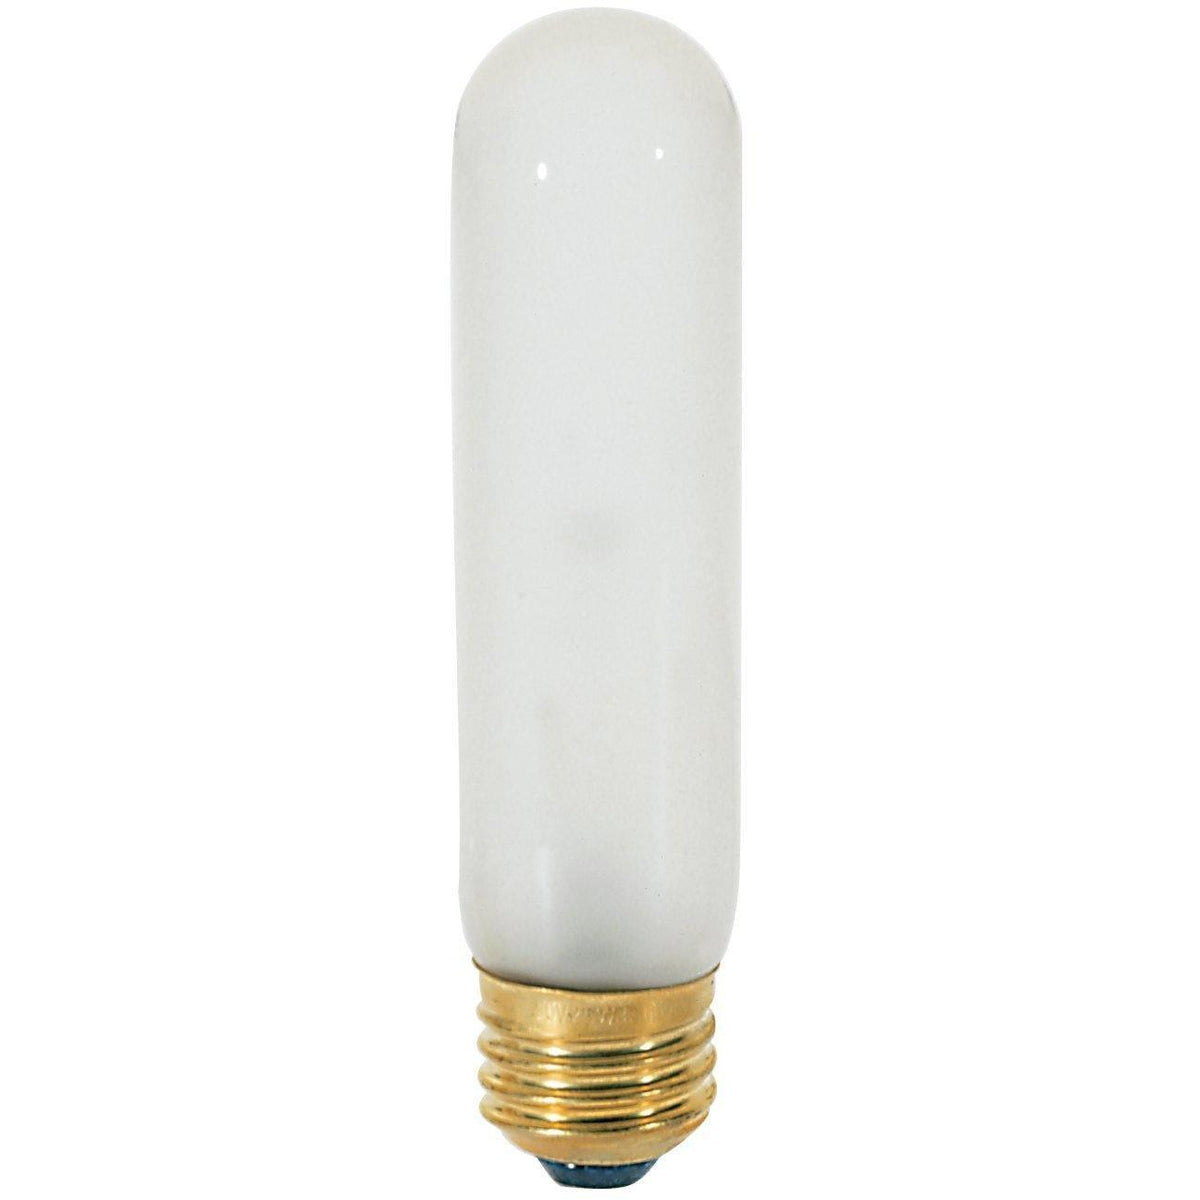 Satco Products - 25 Watt T10 Incandescent, Frost, 2000 Average rated hours, 200 Lumens, Medium base, 120 Volt - S3251 | Montreal Lighting & Hardware